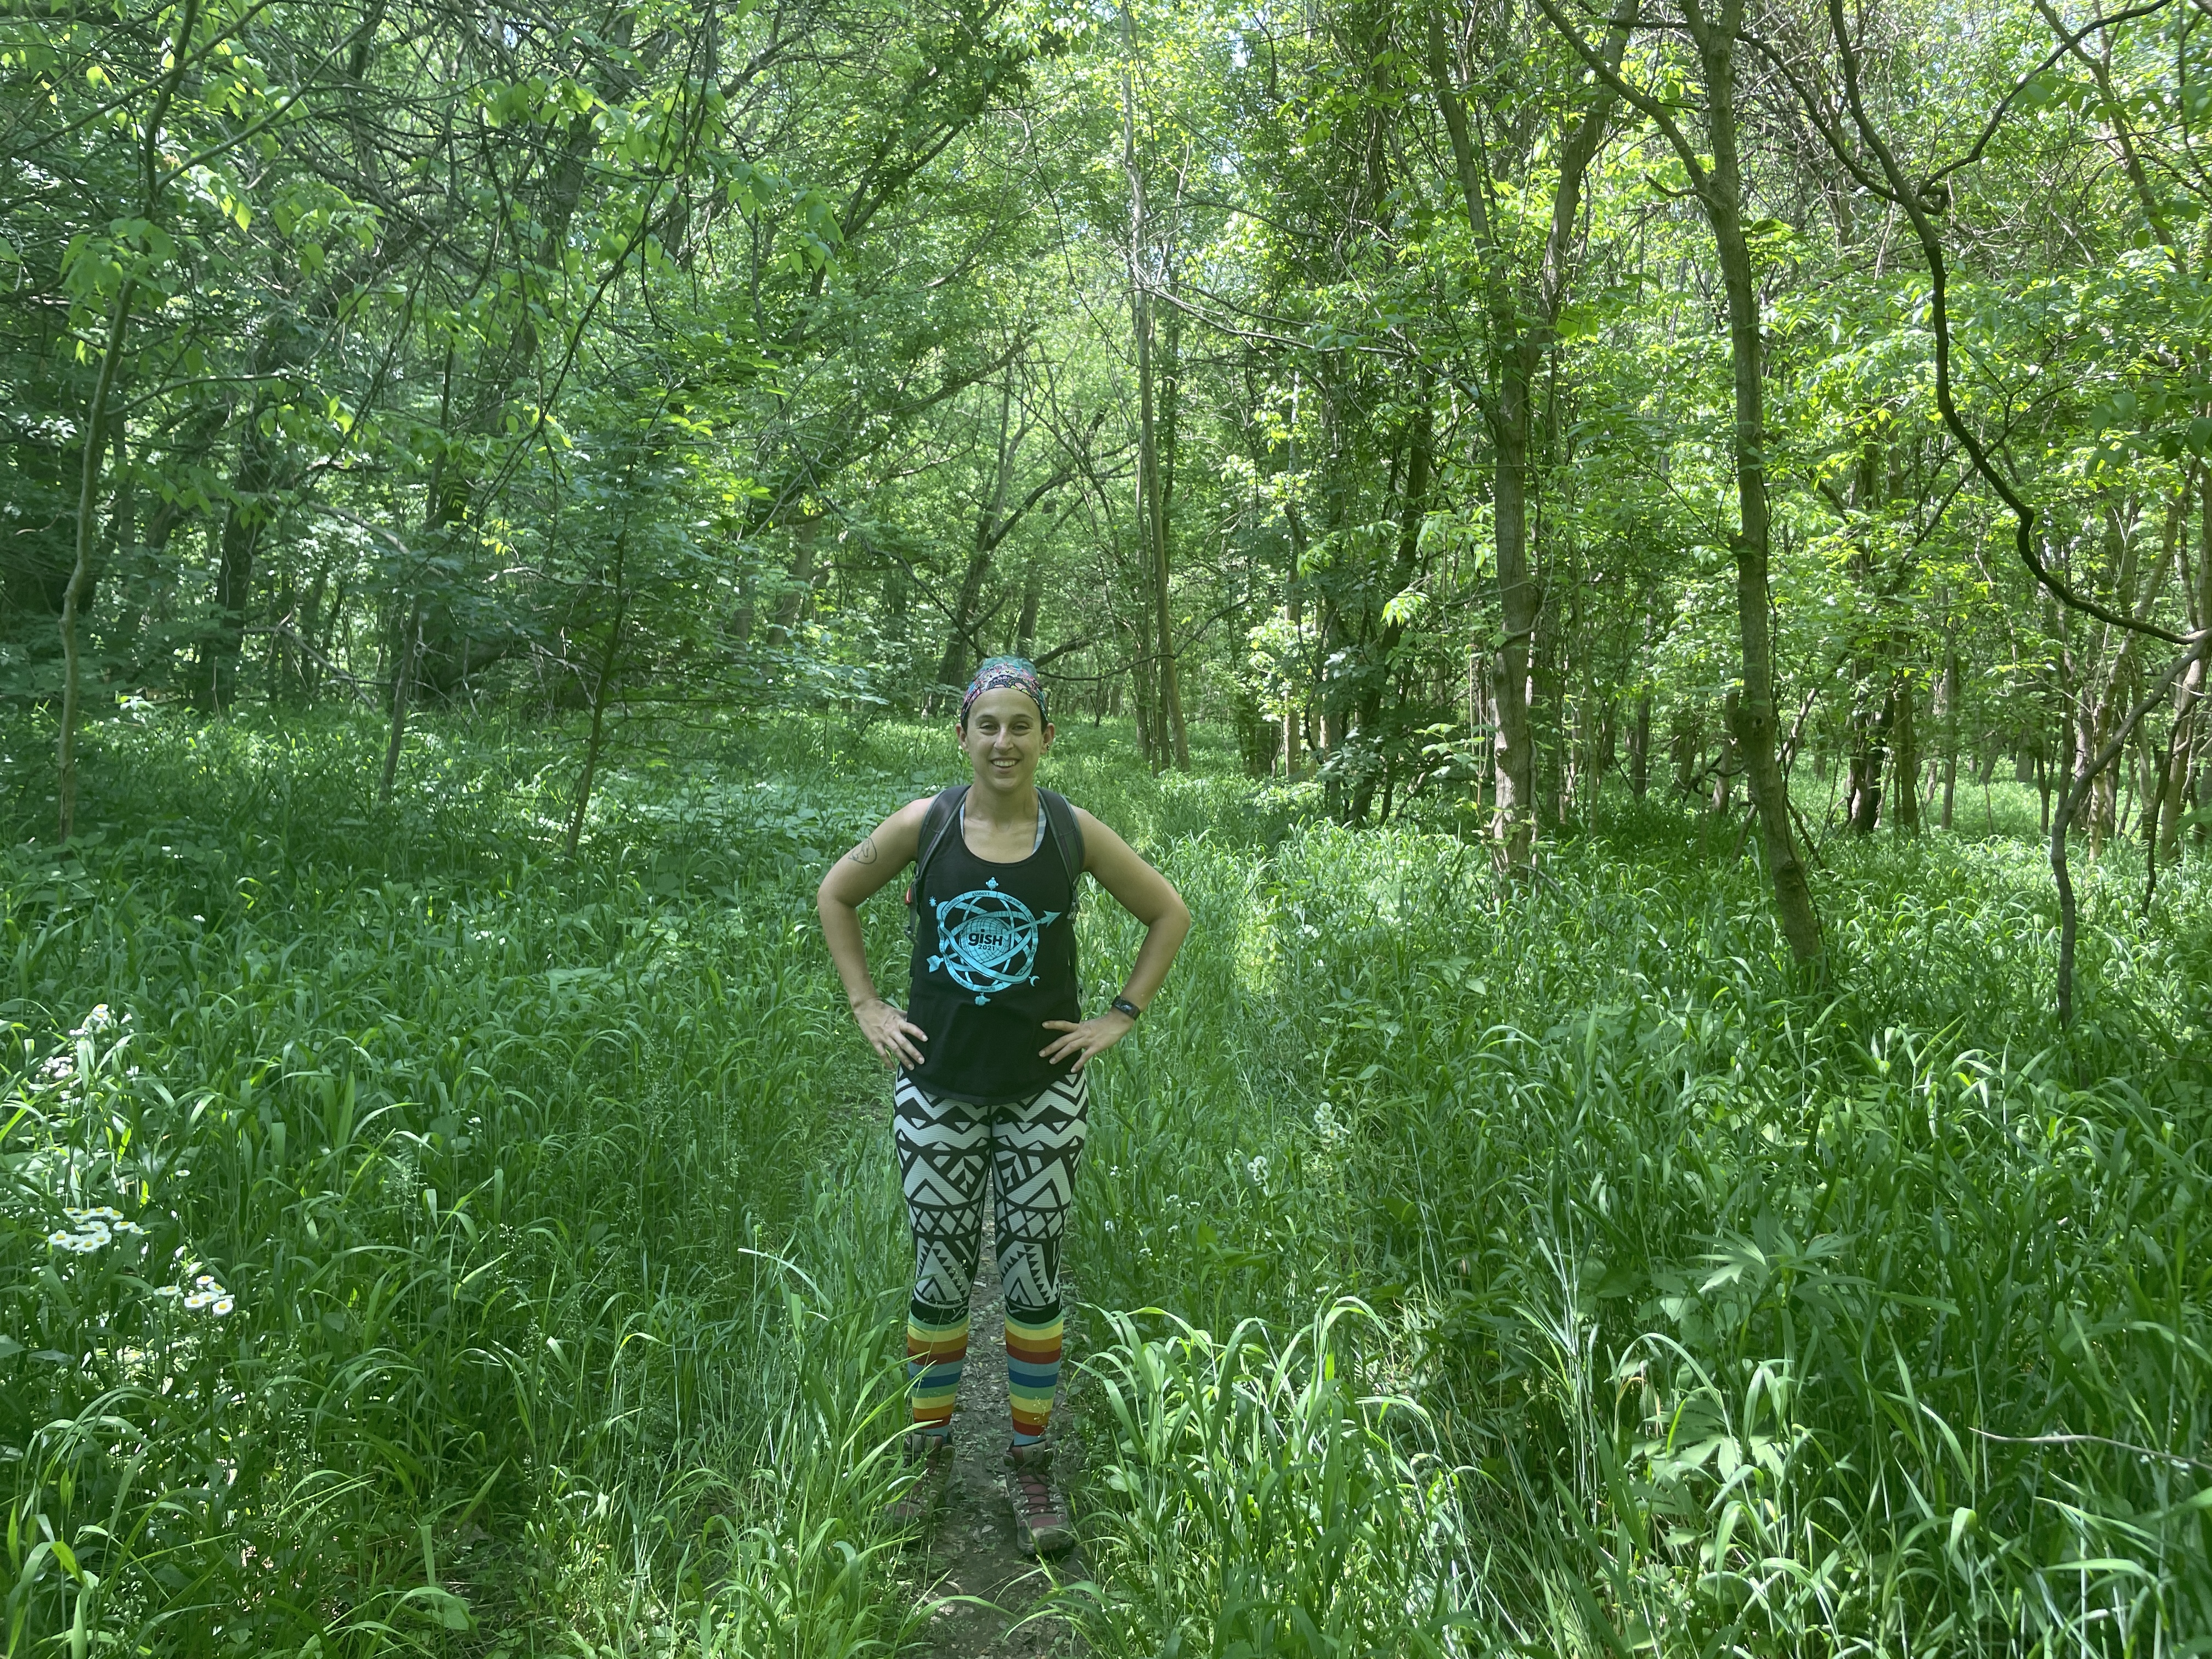 Photo of author Mara Thacker standing on a narrow trail with tall grass on either side. Mara stands with hands on hips. There are trees in the background. Main color in the photo is green.